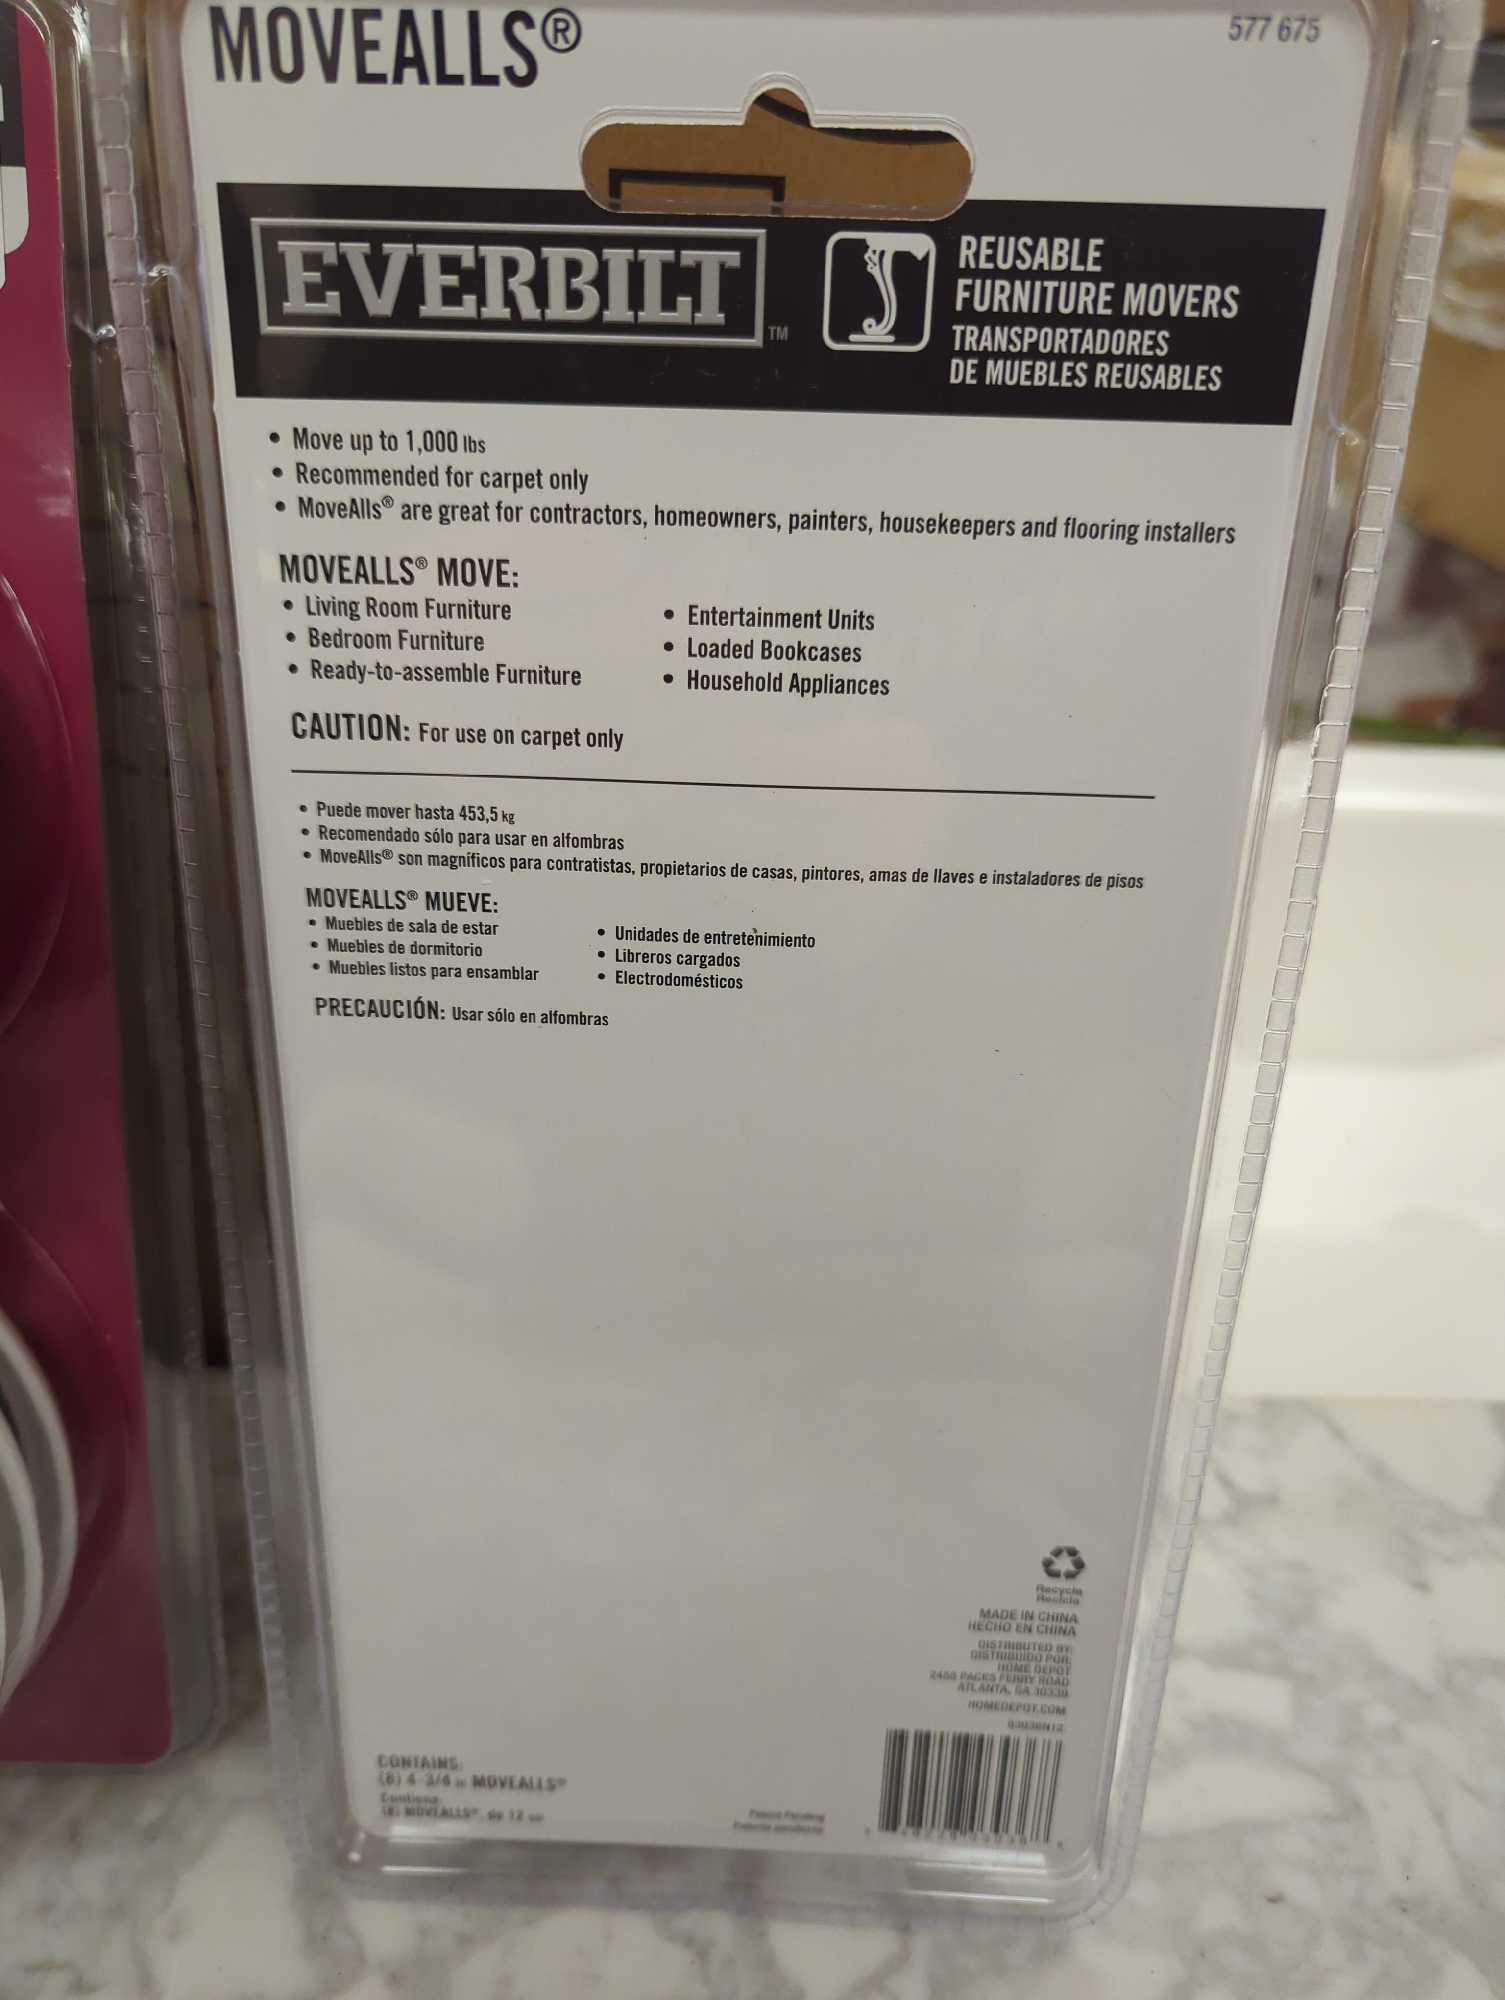 Lot of 2 Packs Of Everbilt Hard Sliders Reuse Furniture Movers - Pads (8-Pack), Appears to be New in